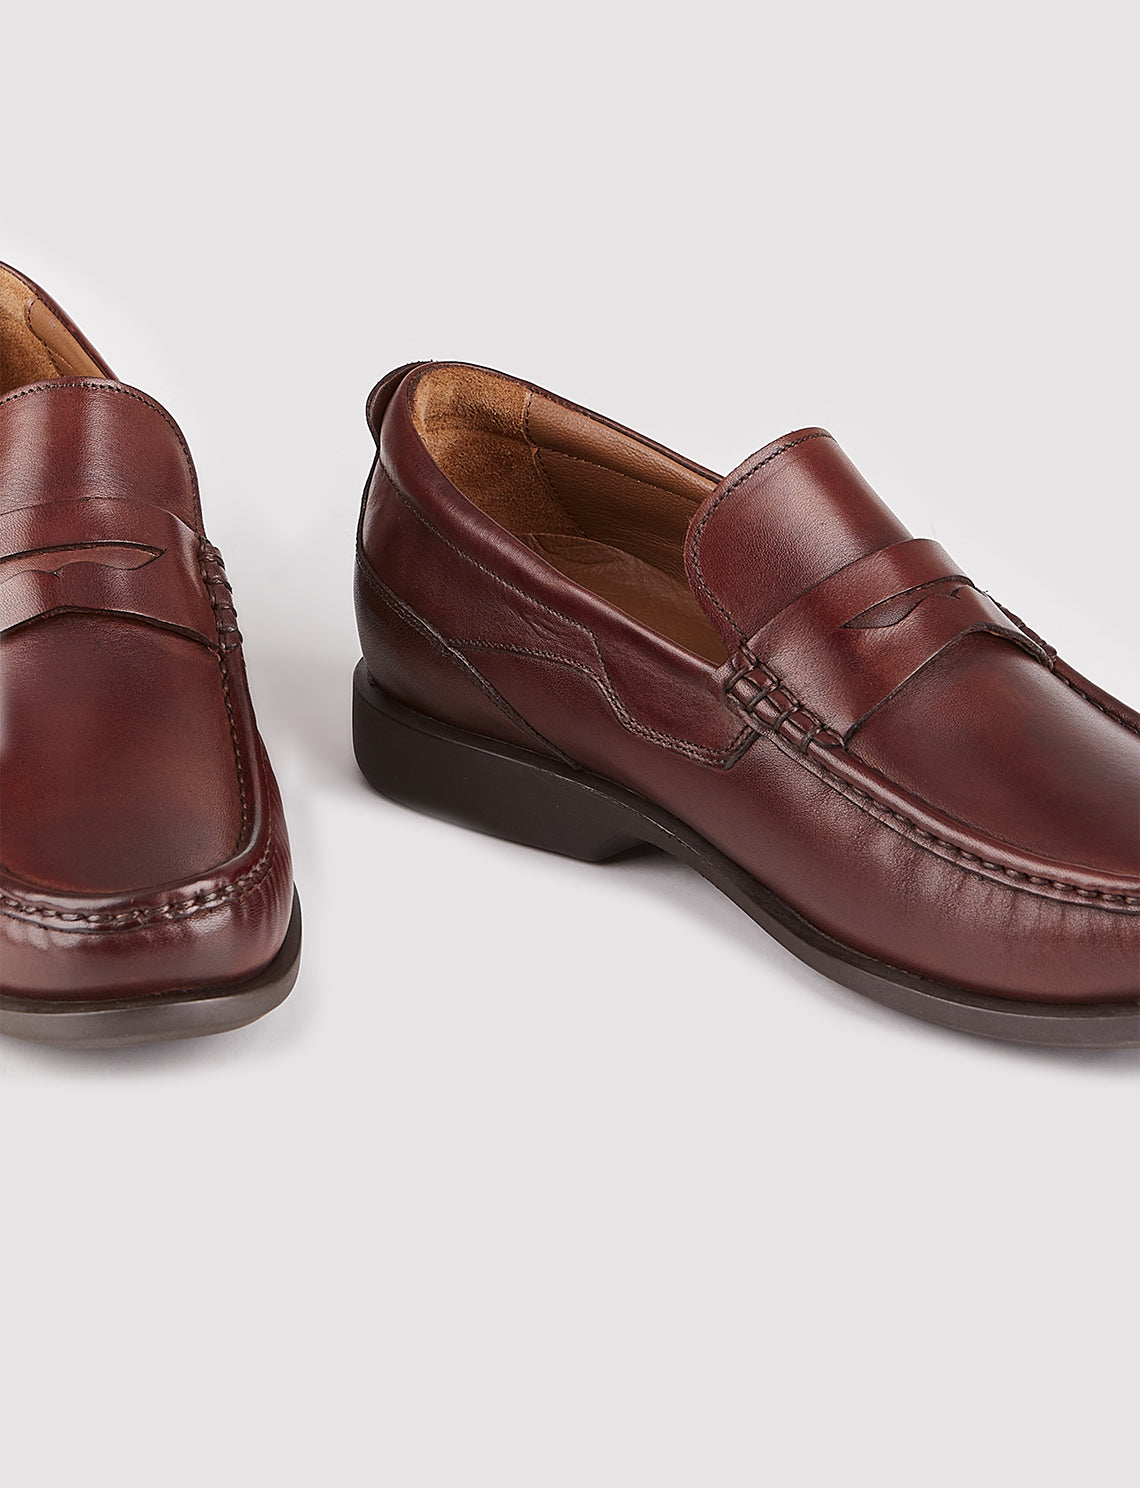 Men Brown Genuine Leather Slip On Penny Loafers